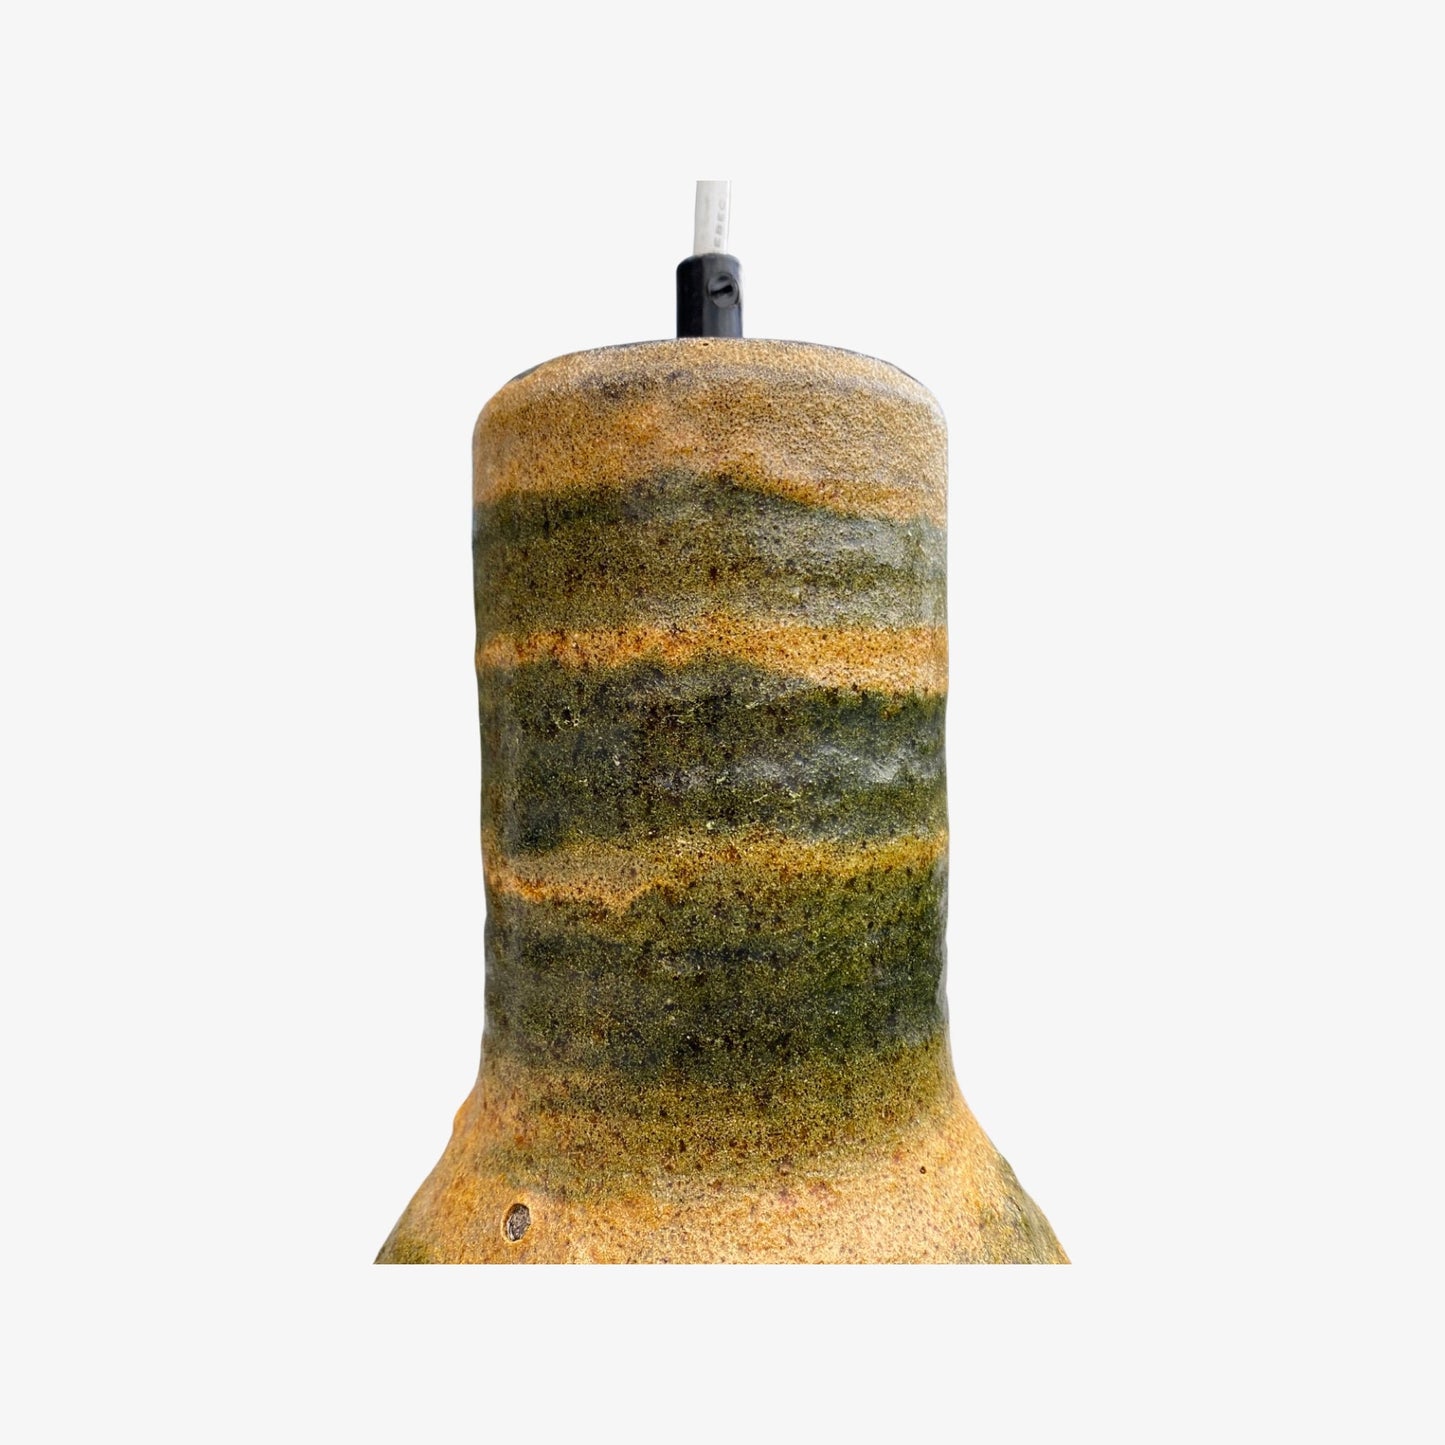 2 Handmade Ceramic Pendant Lights Made by ‘Atelier DINGES’ in Holland, 1970s | Handmade Ceramic Pottery From The Mid Century - Set of 2